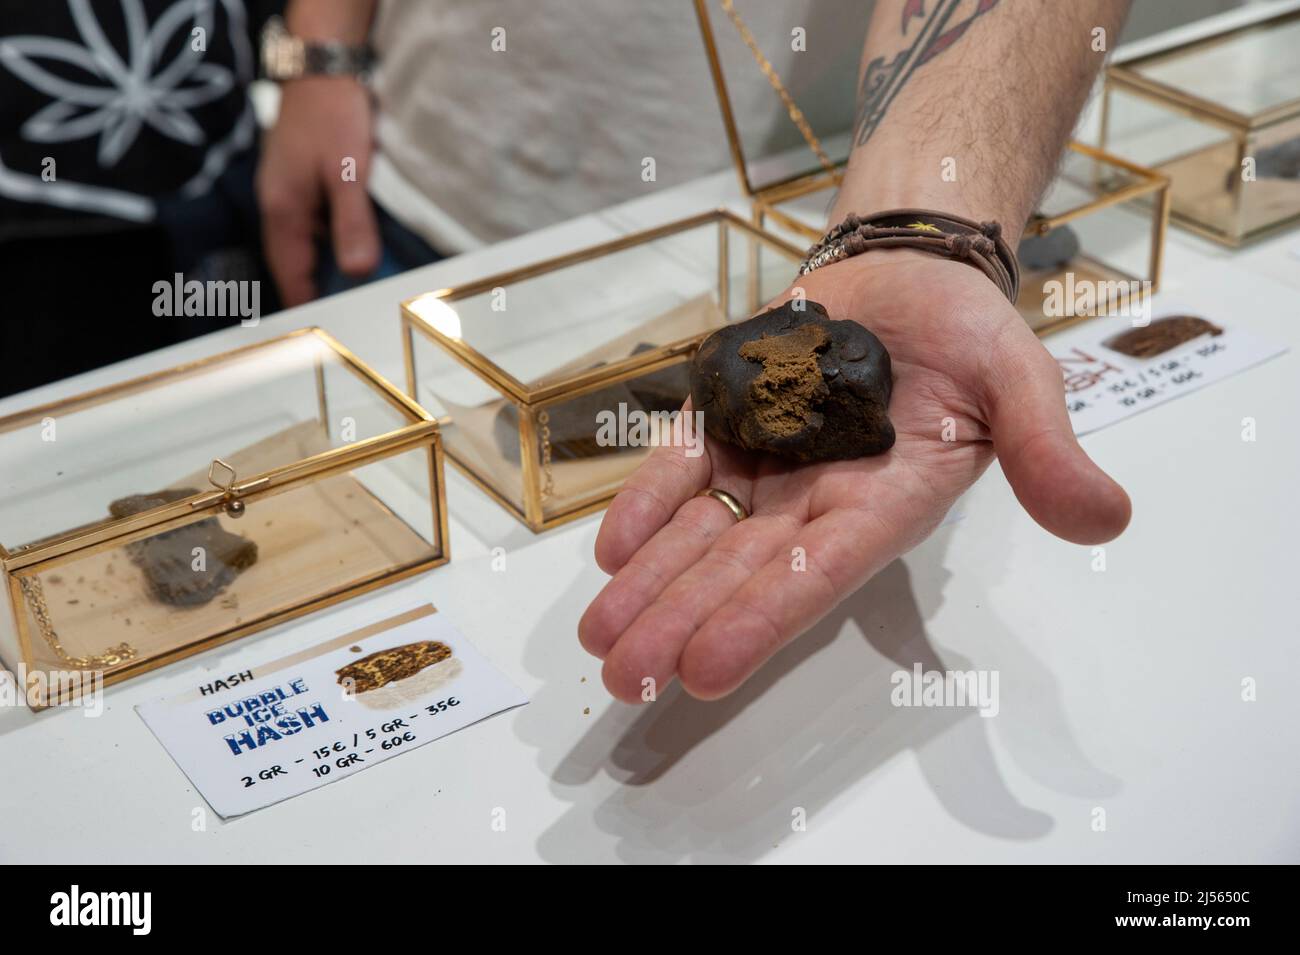 Piece of chocolate hashish (close up), on display at the trade show “Indicasativa 2022”.devoted to the hemp world. Stock Photo